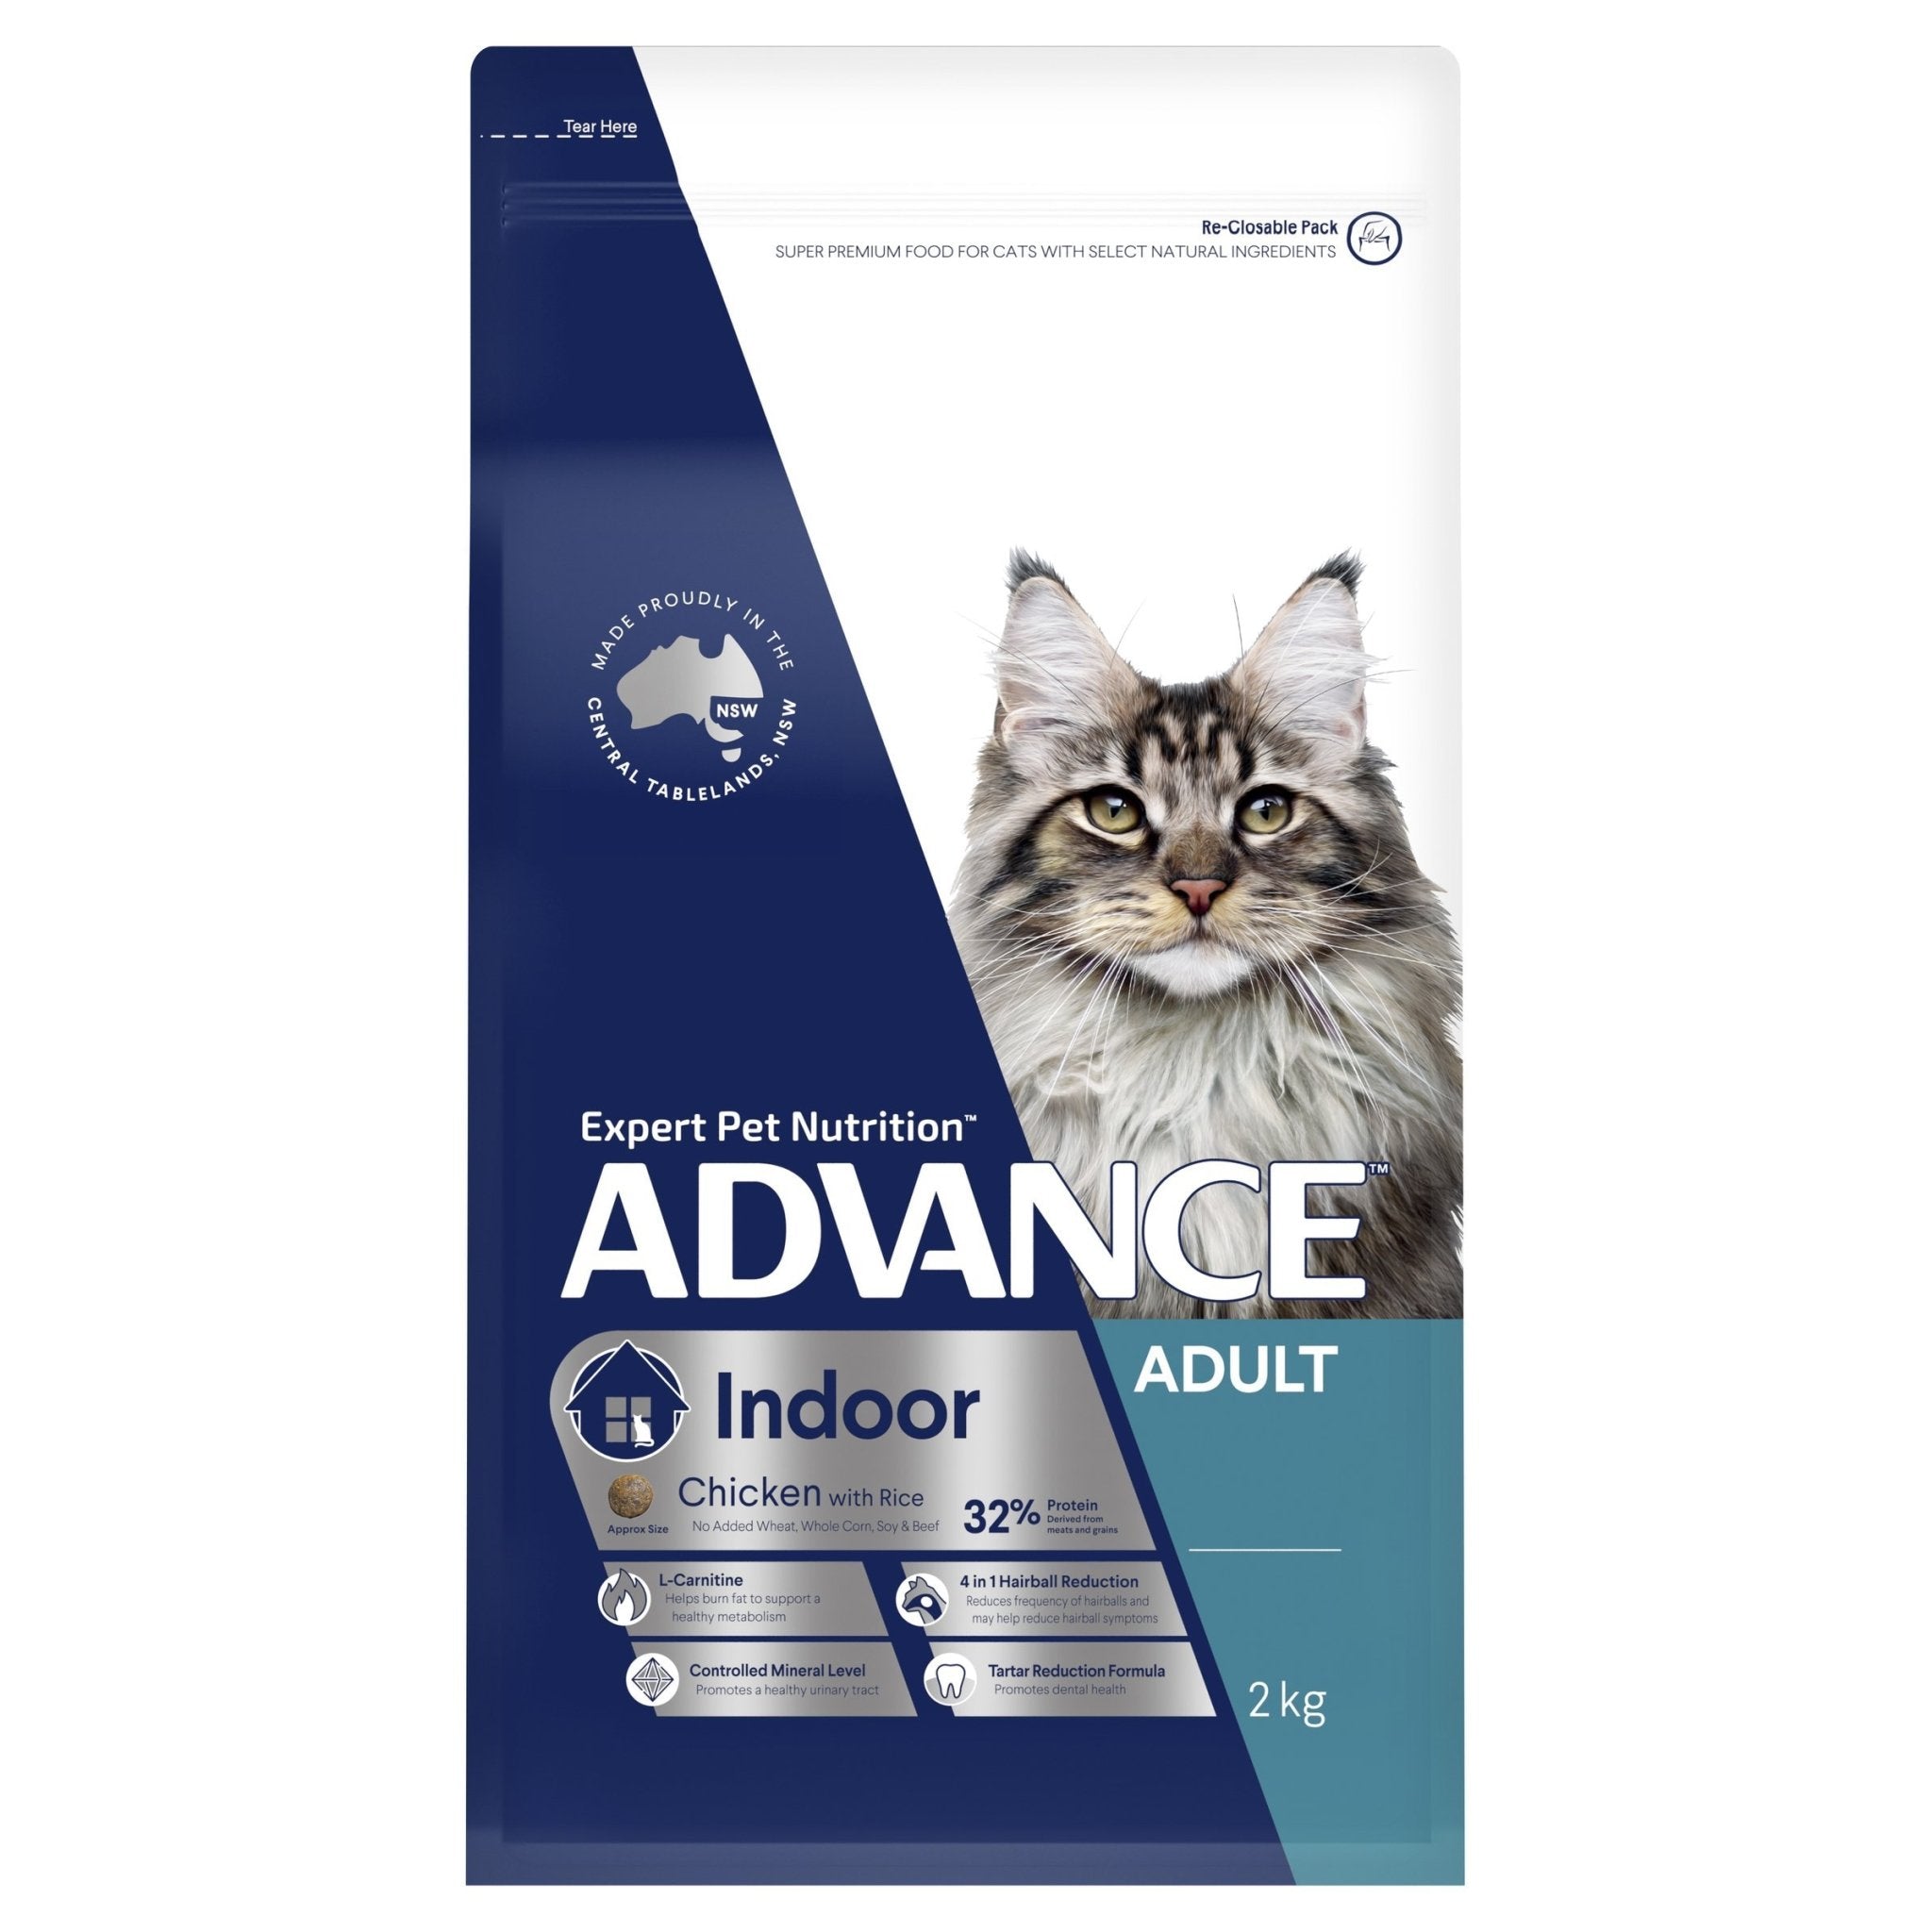 ADVANCE Indoor Adult Dry Cat Food Chicken with Rice 2kg Bag